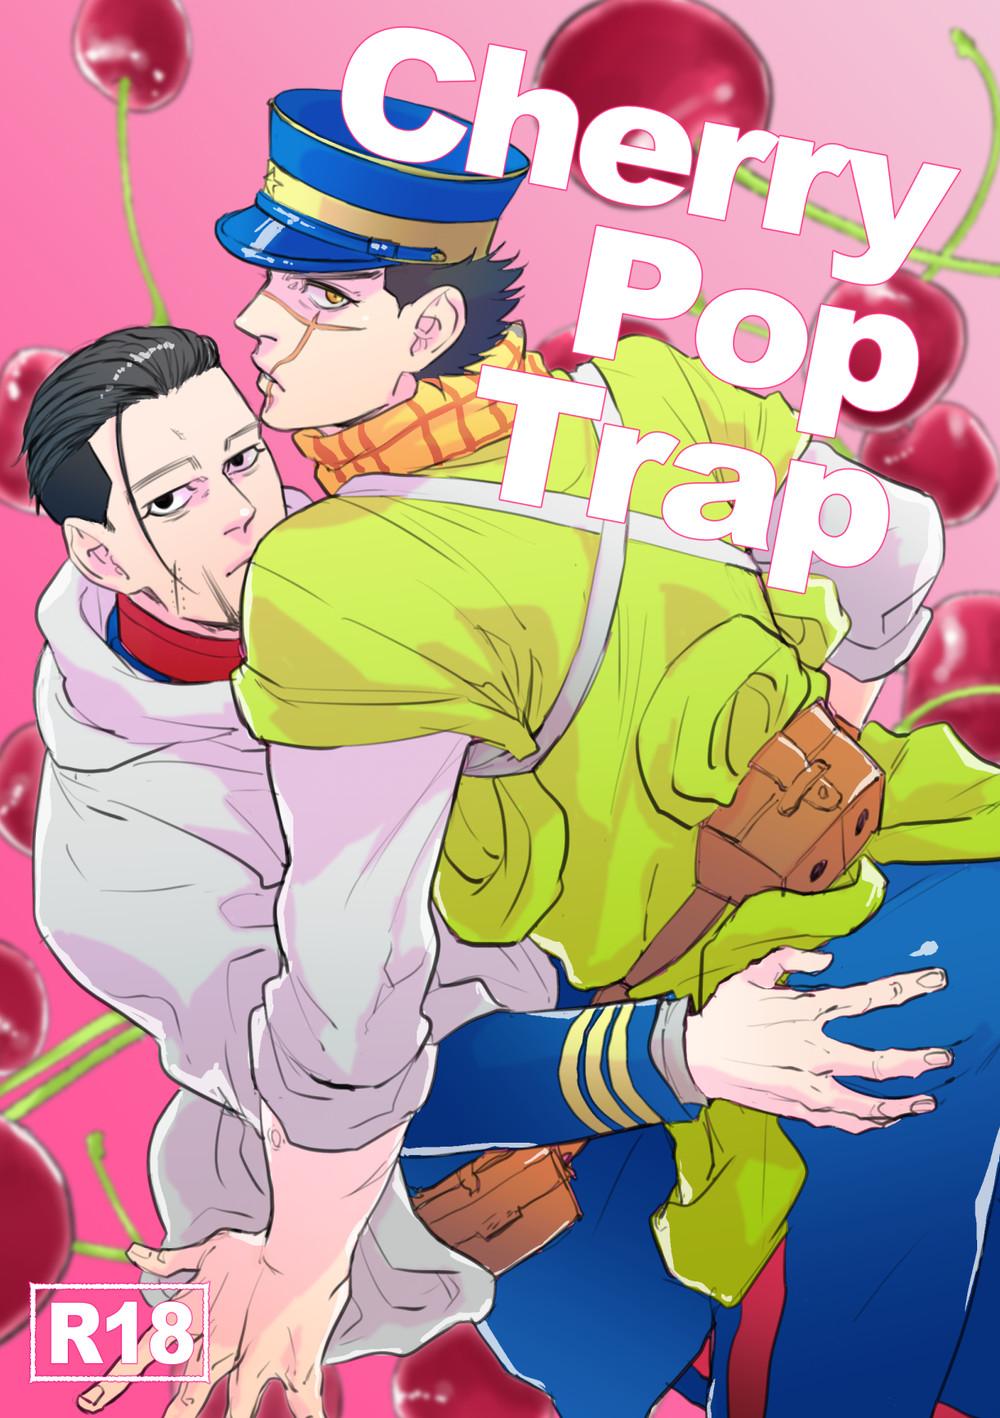 Webcamsex Cherry Pop Trap - Golden kamuy Family Roleplay - Picture 1